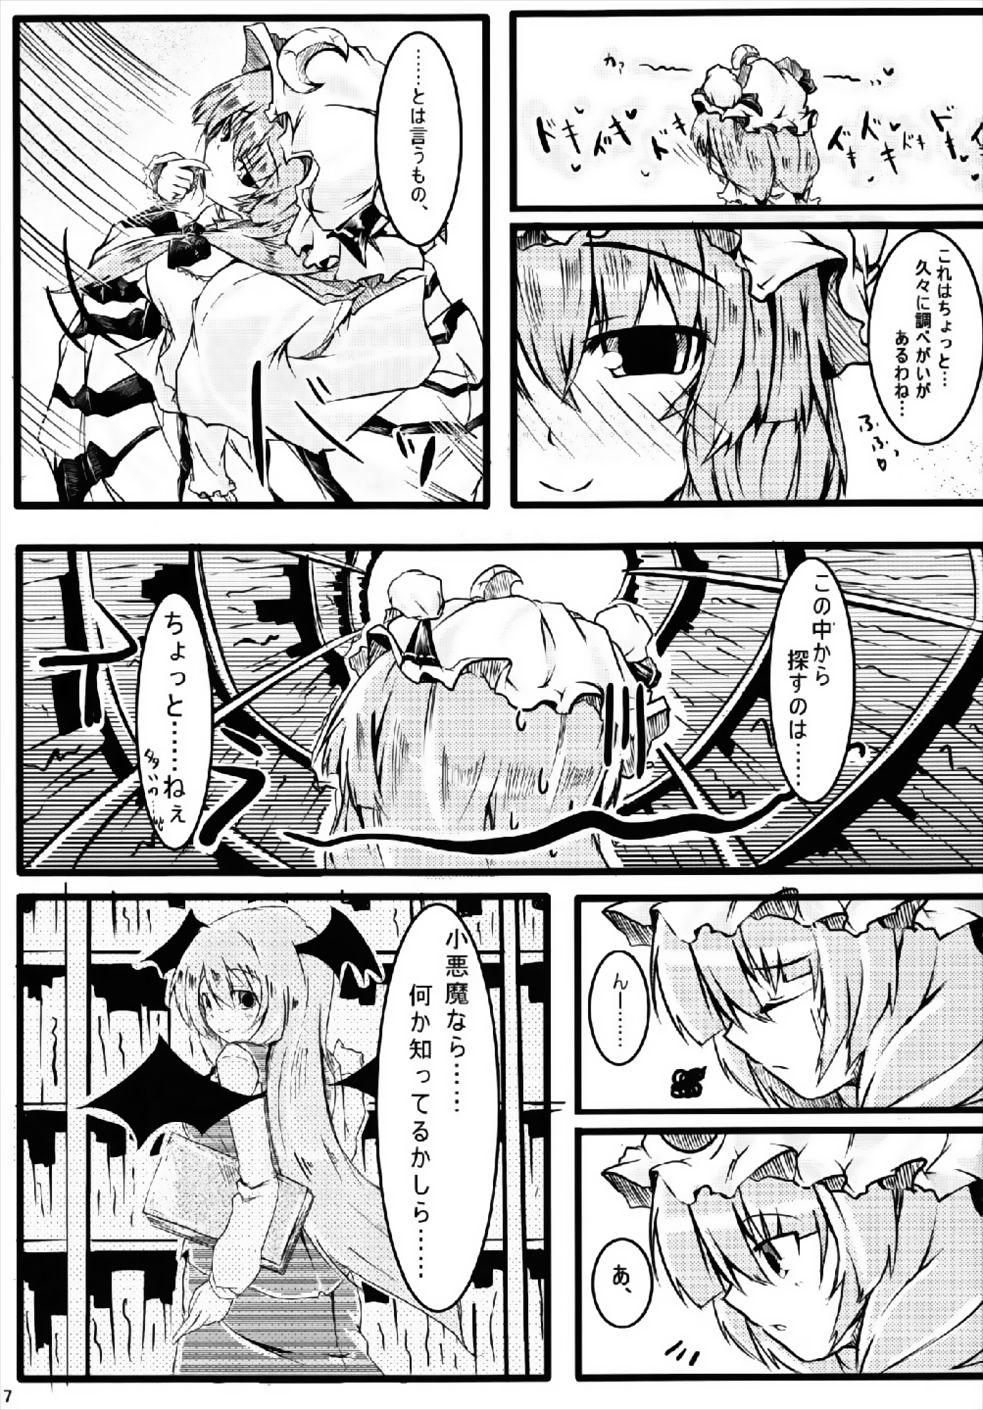 Gay Ass Fucking RemiFlaPatche! - Touhou project Bwc - Page 6